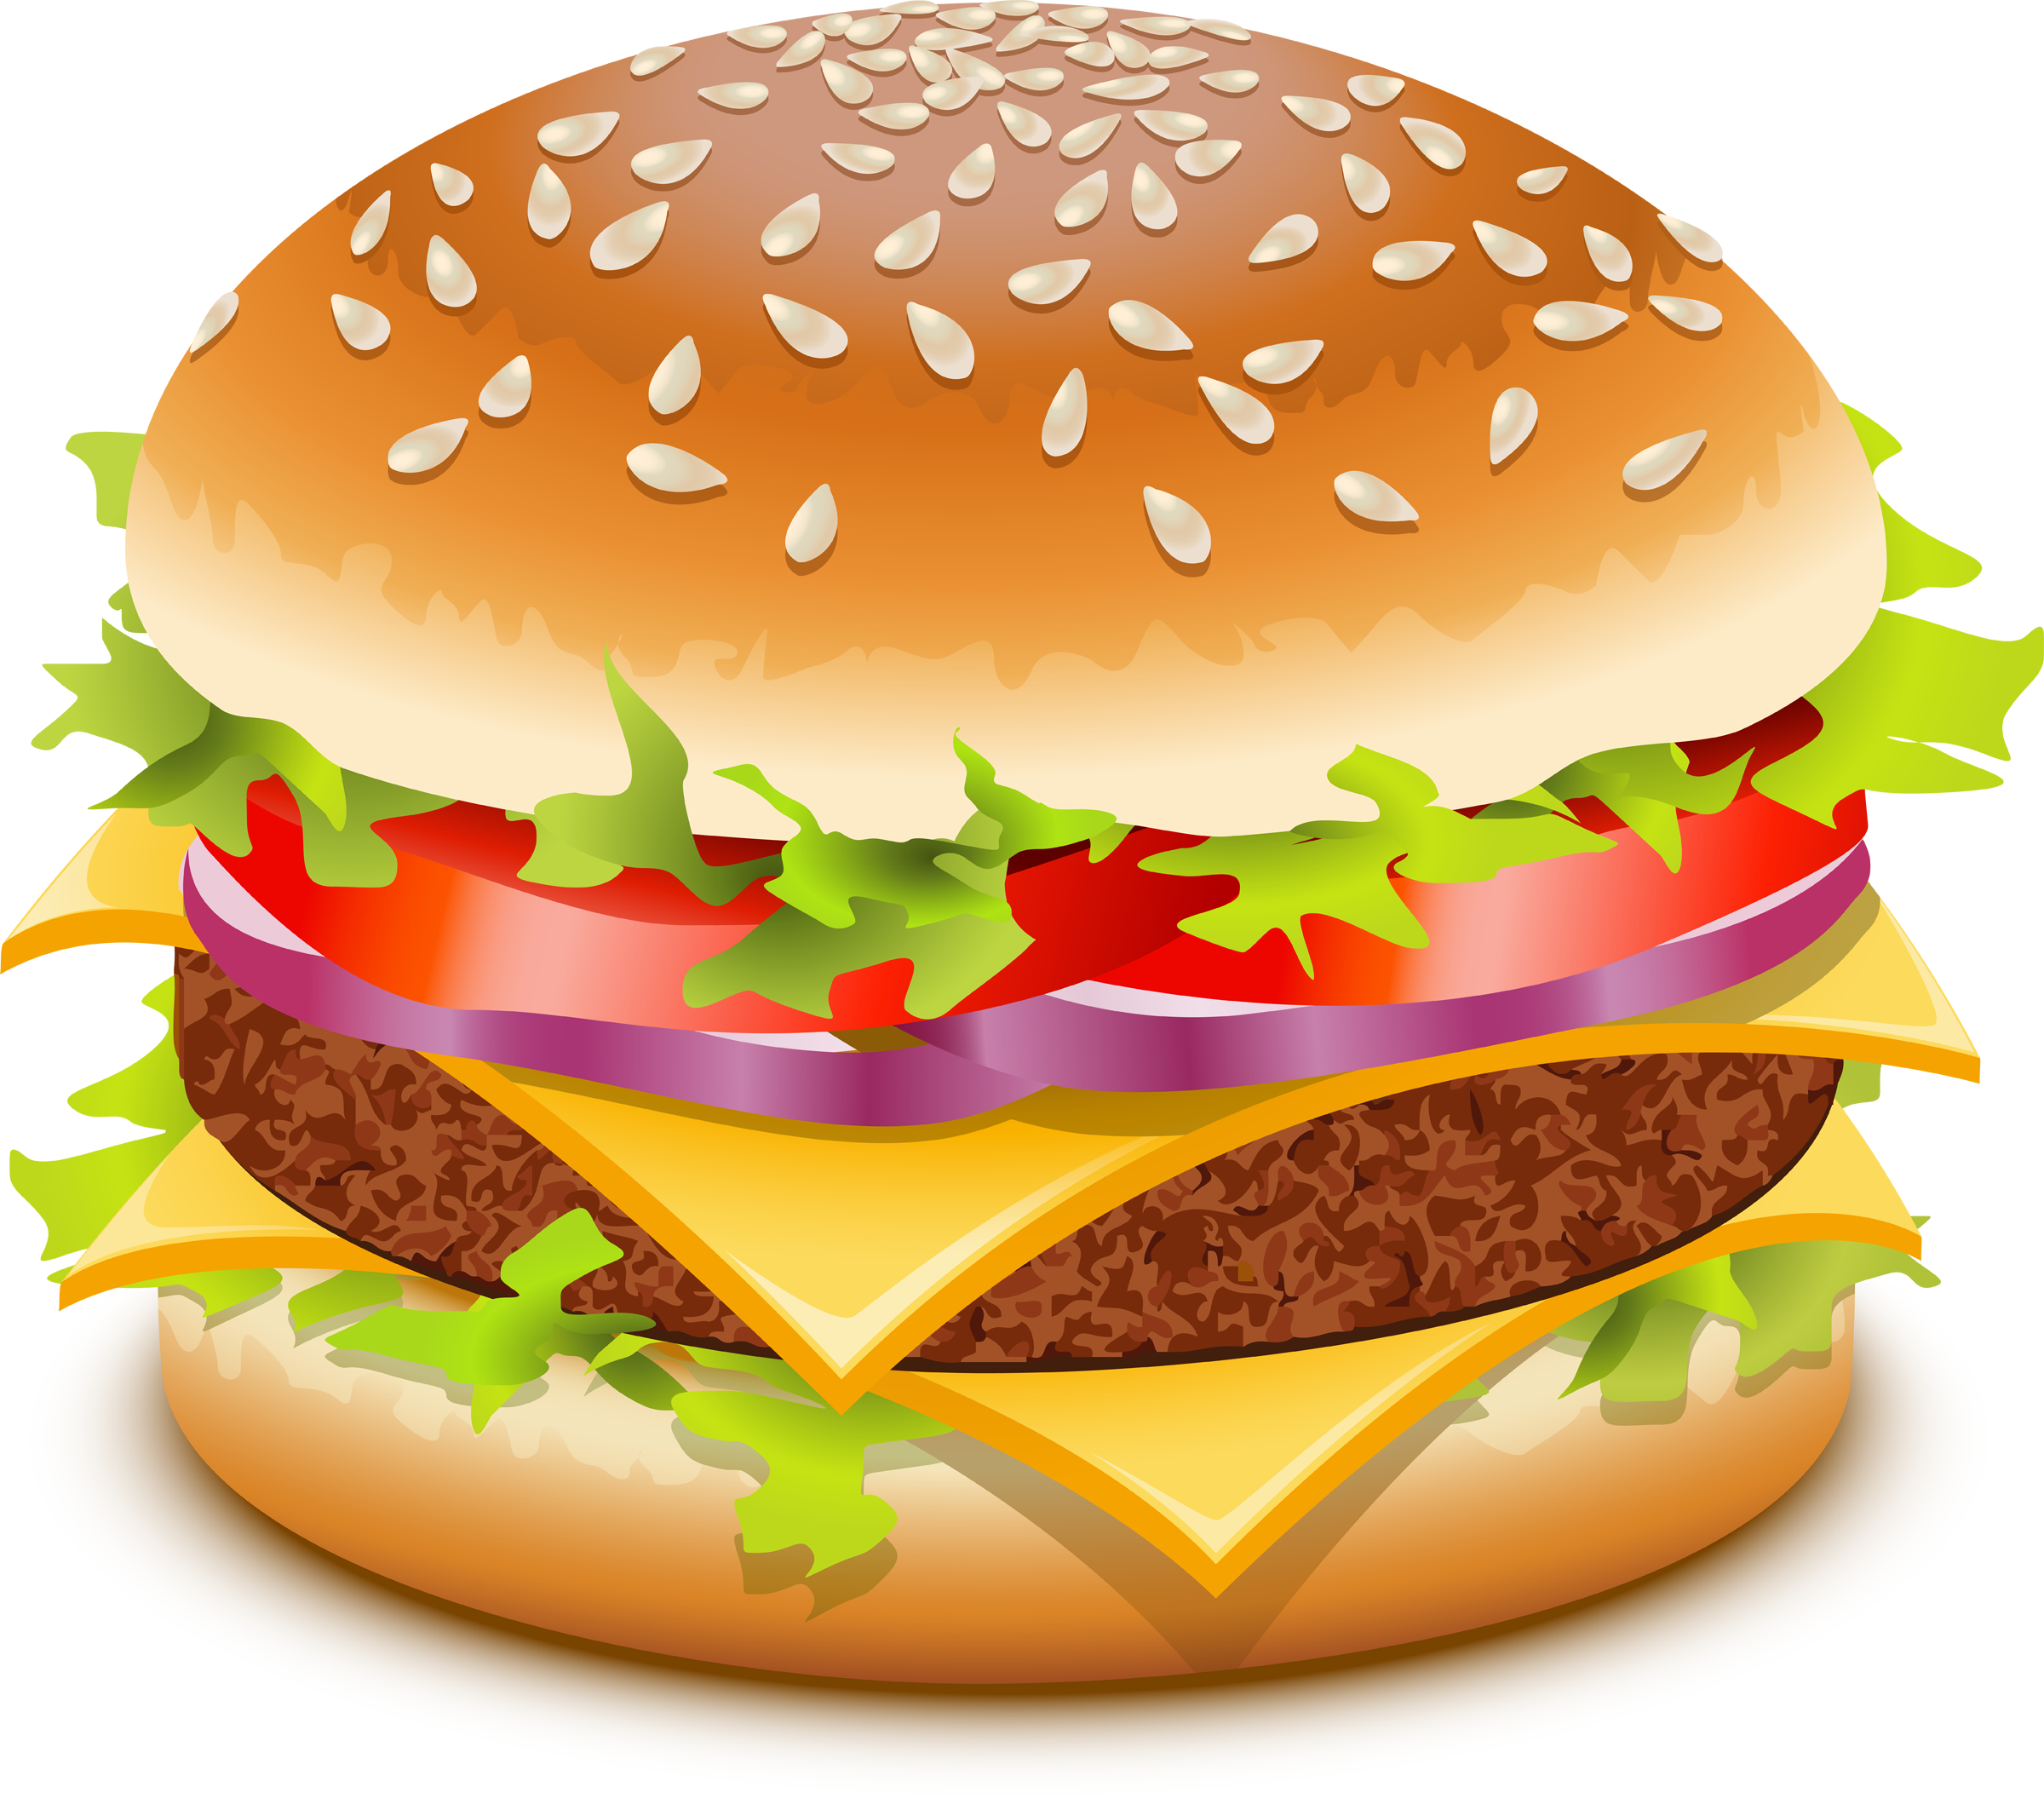 Burgers clipart free download clip art on png